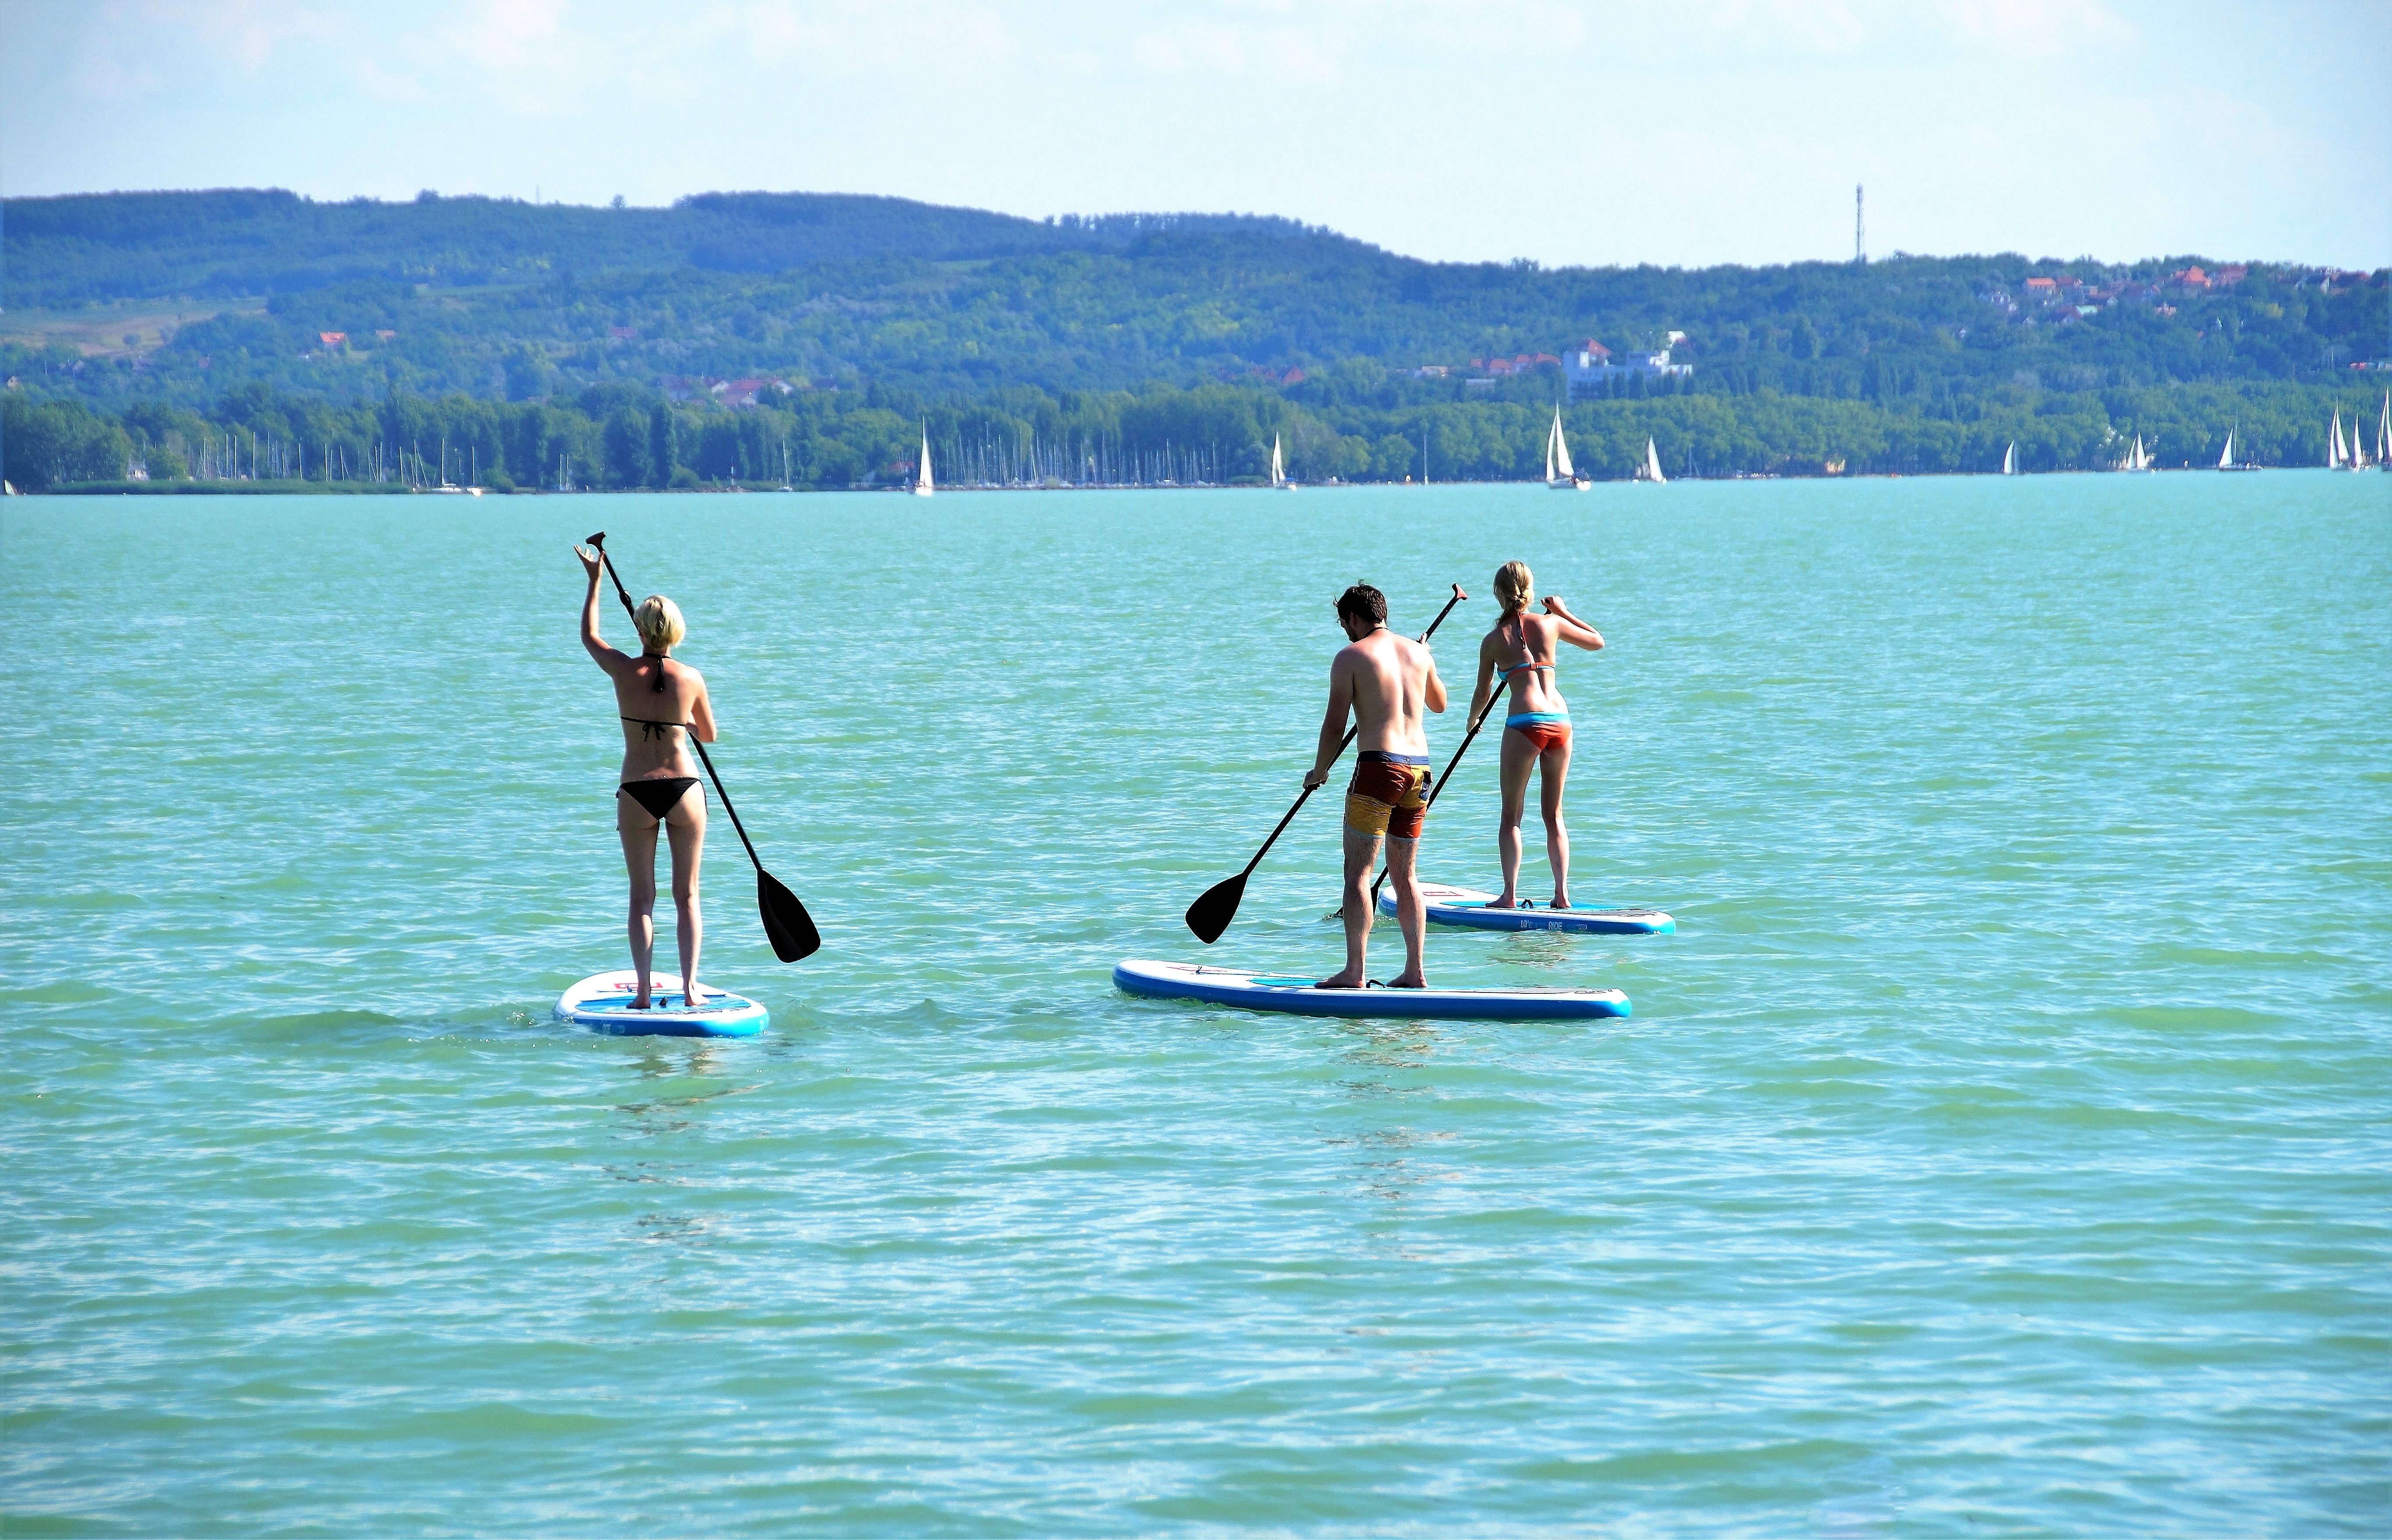 3 people standing on surf board